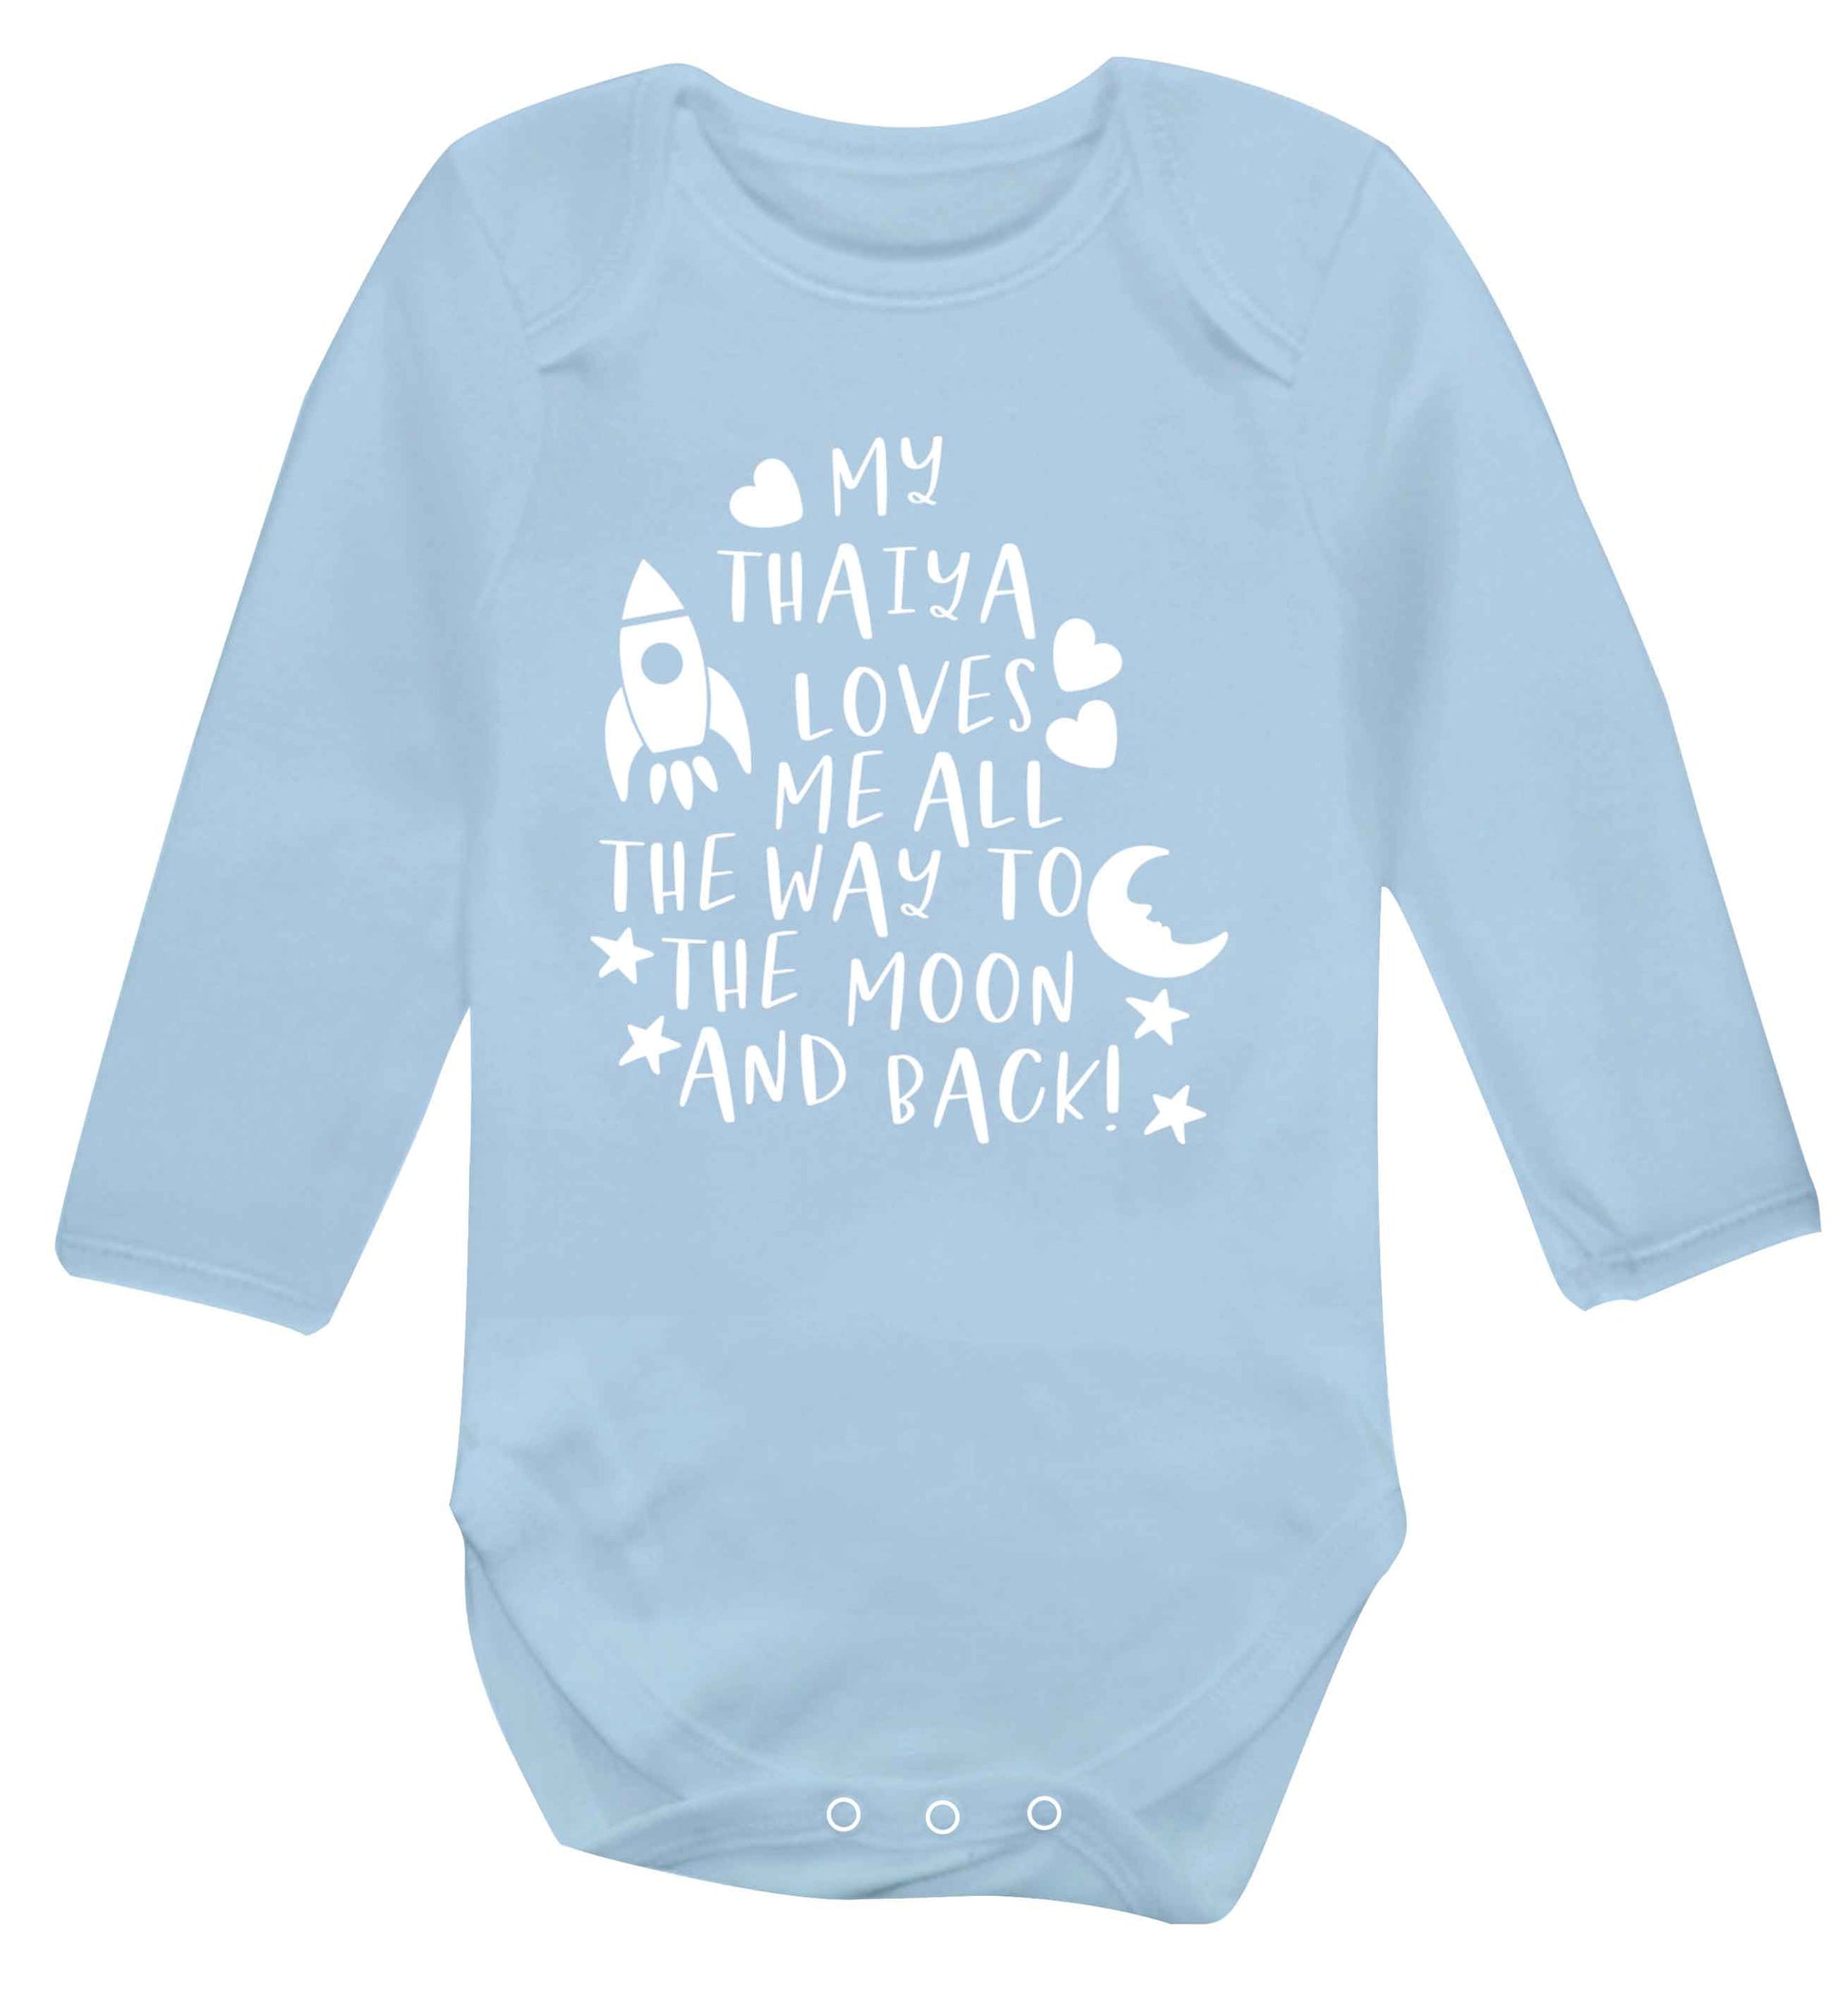 My thaiya loves me all the way to the moon and back Baby Vest long sleeved pale blue 6-12 months